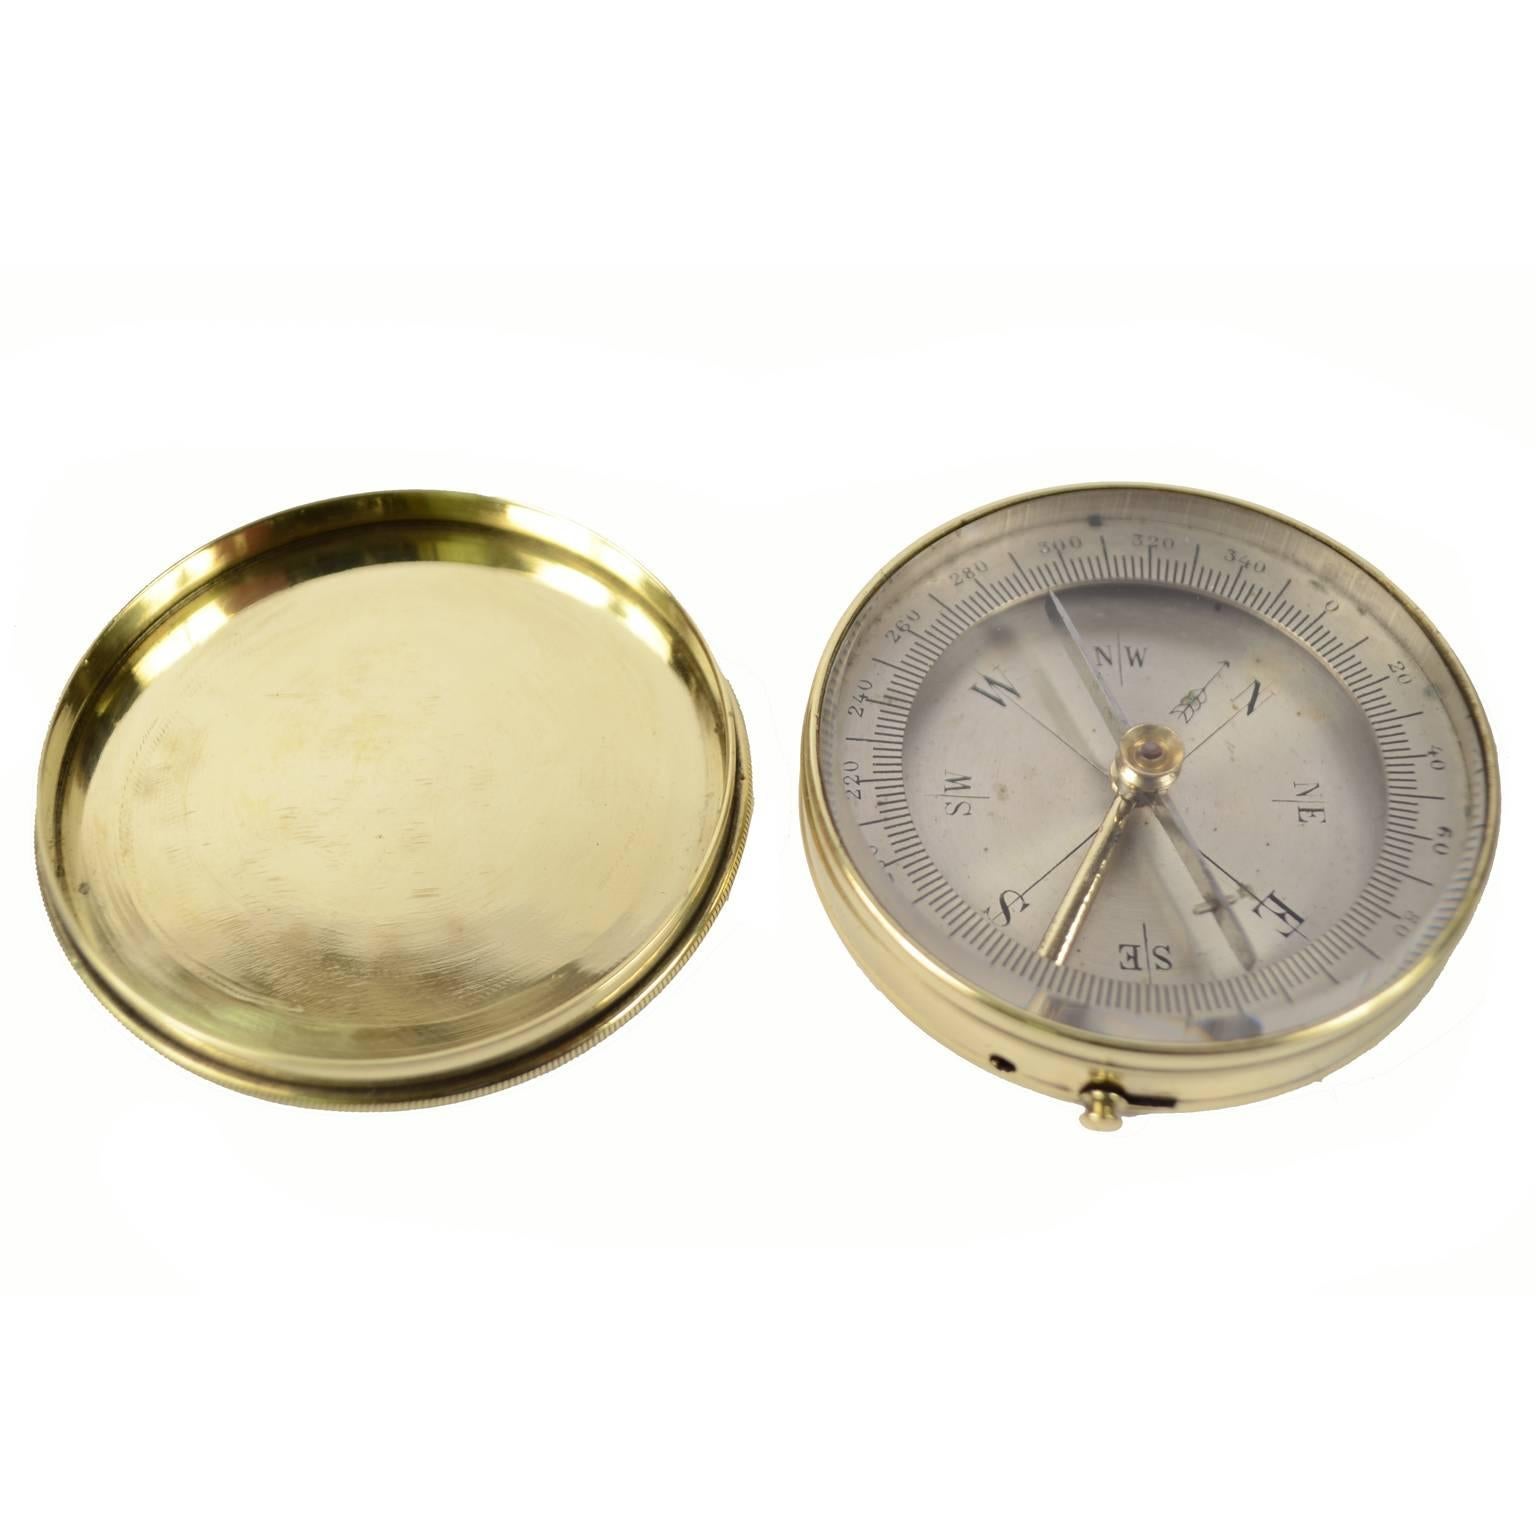 Small Travel Compass with Lid Made in Germany in the Early 1900s